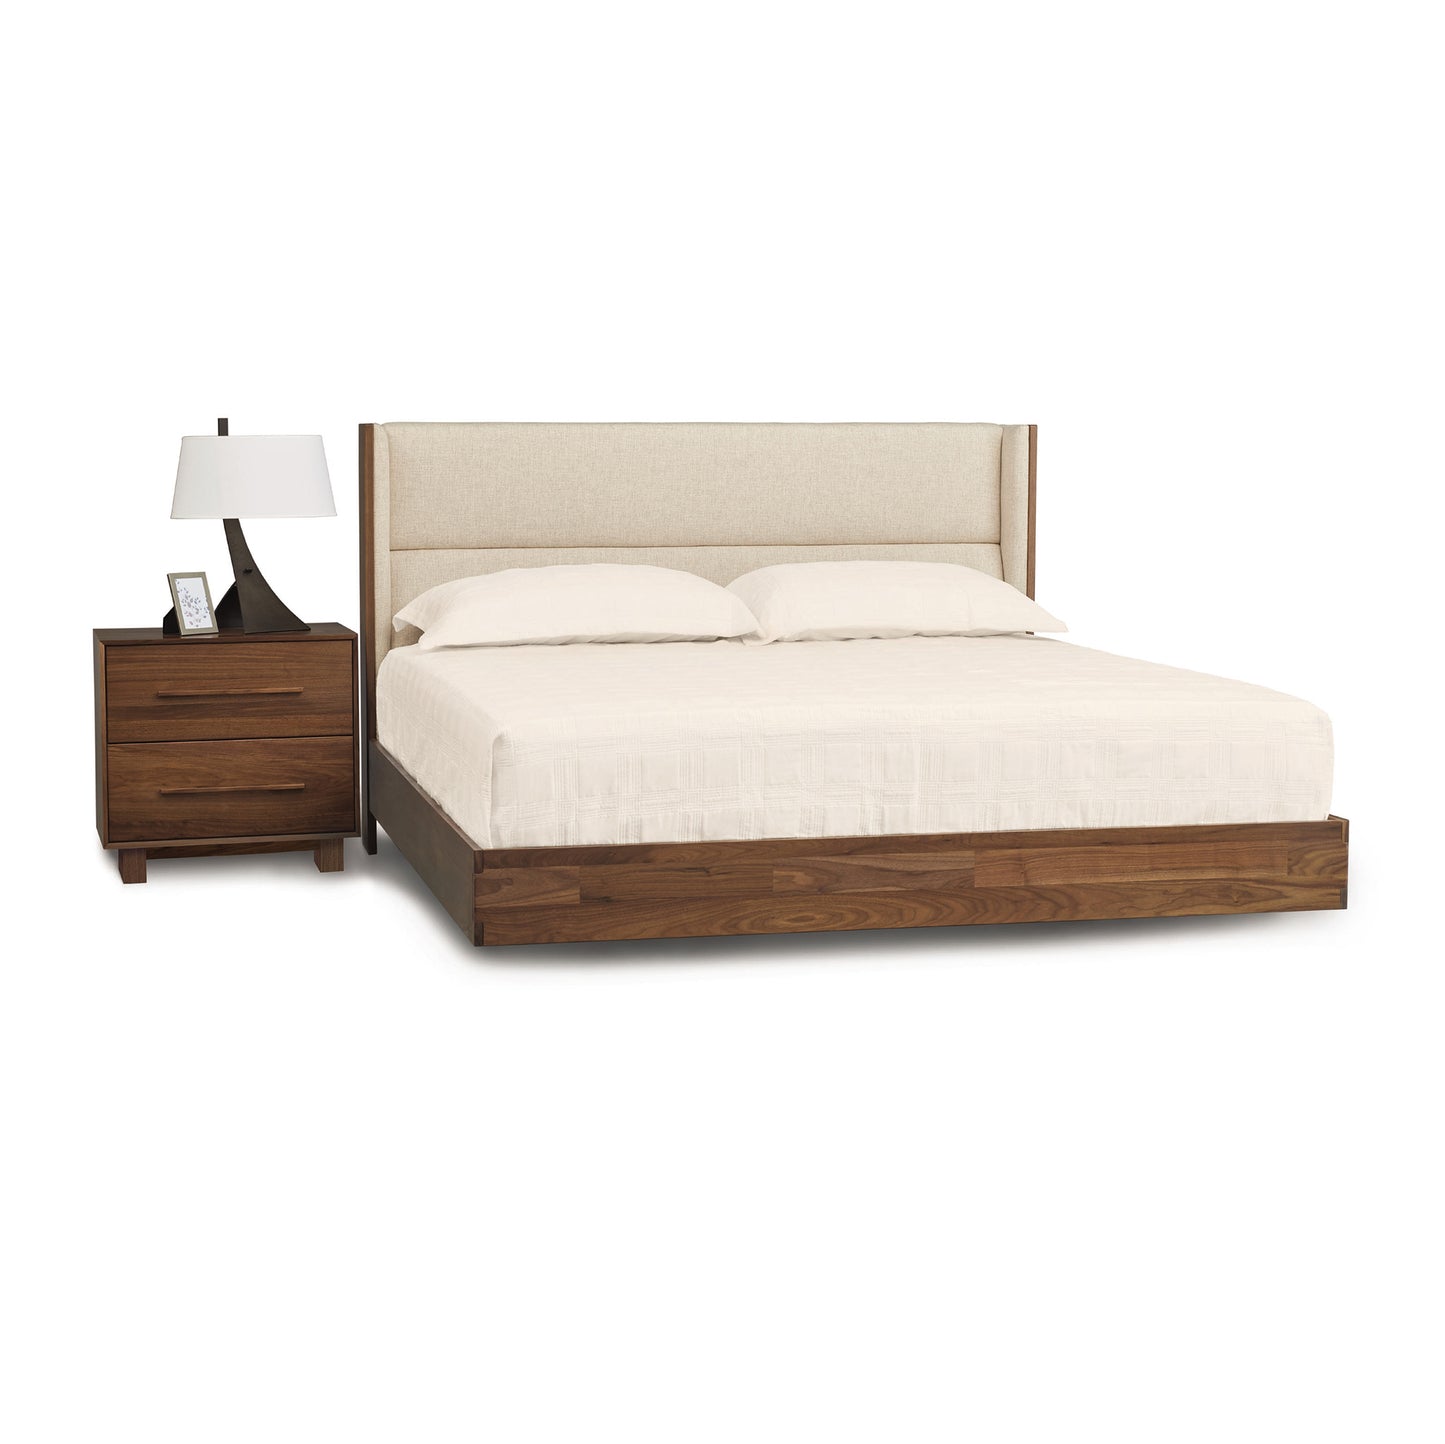 A Copeland Furniture Sloane Floating Bed with a wooden headboard and nightstand.